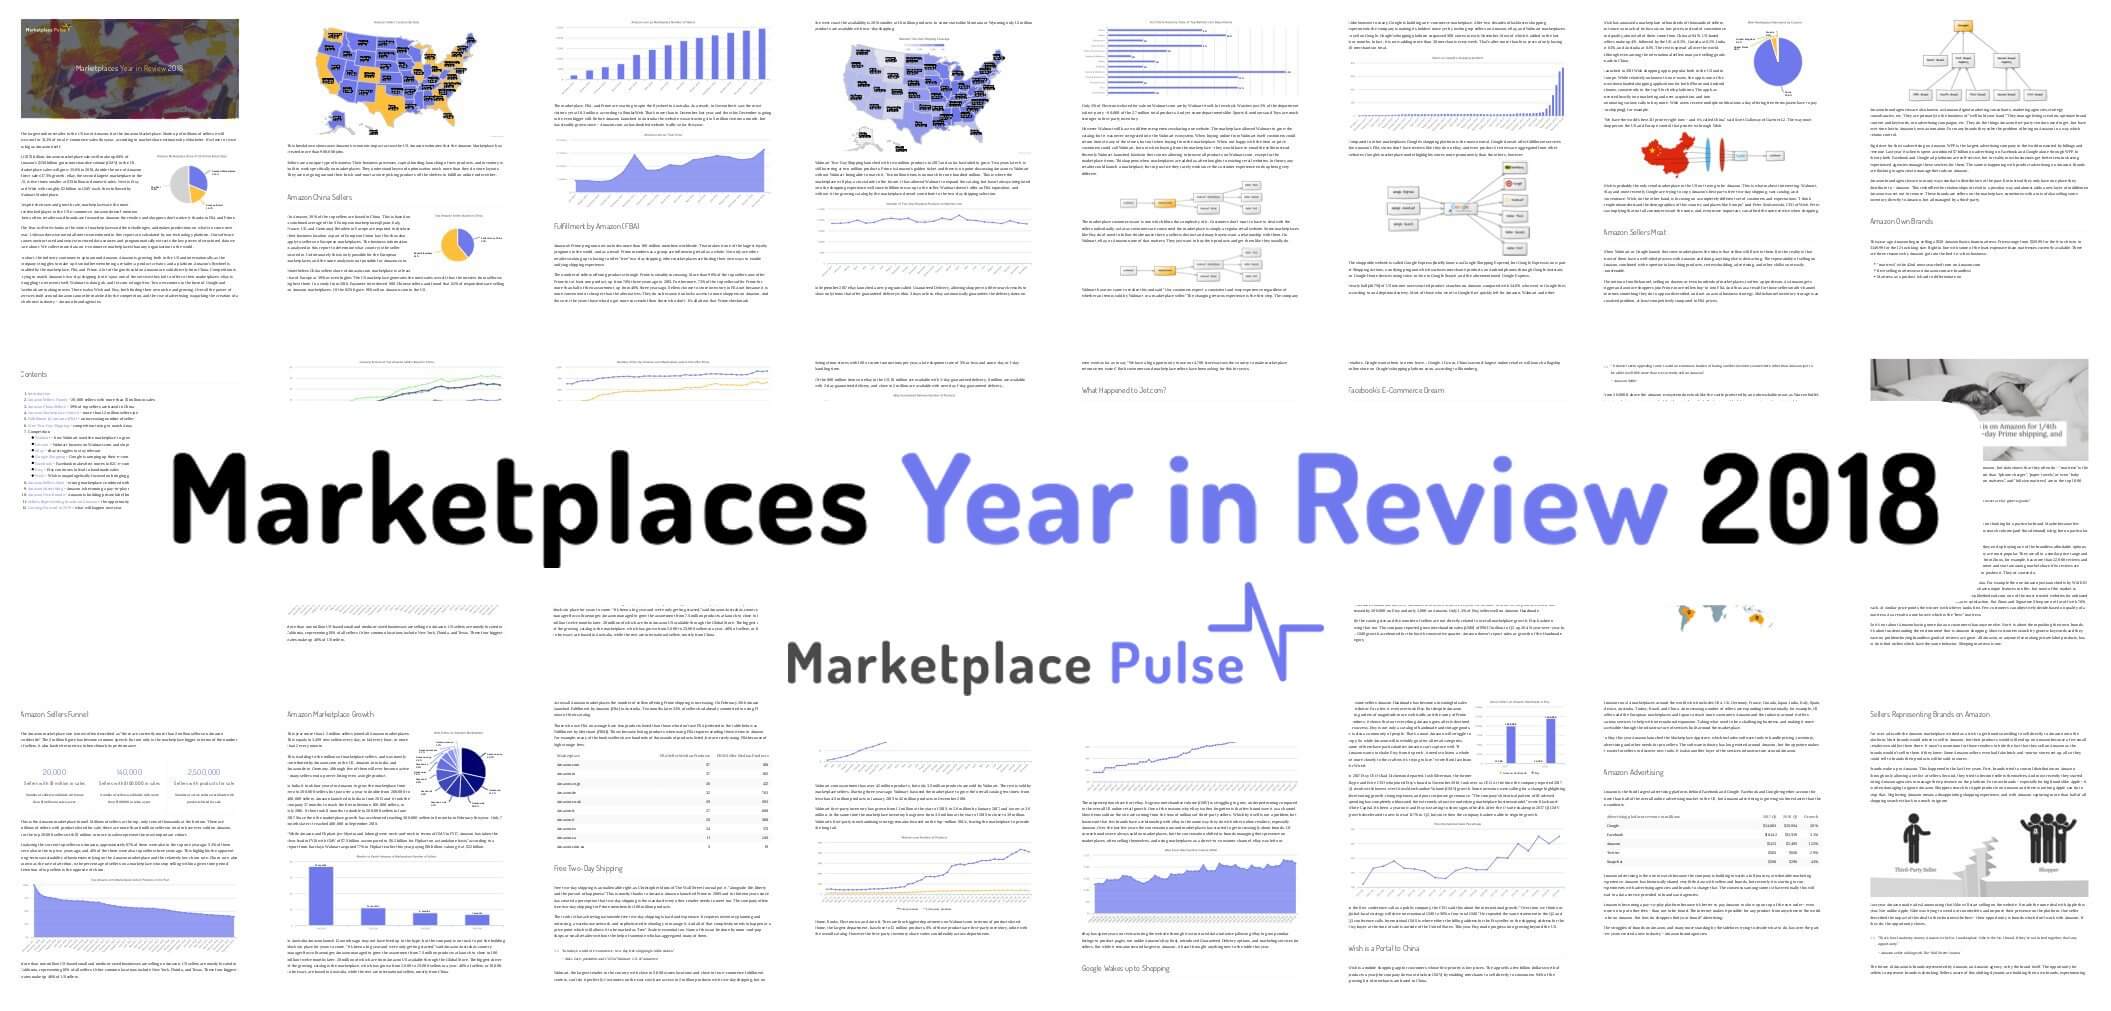 Marketplaces Year in Review 2018